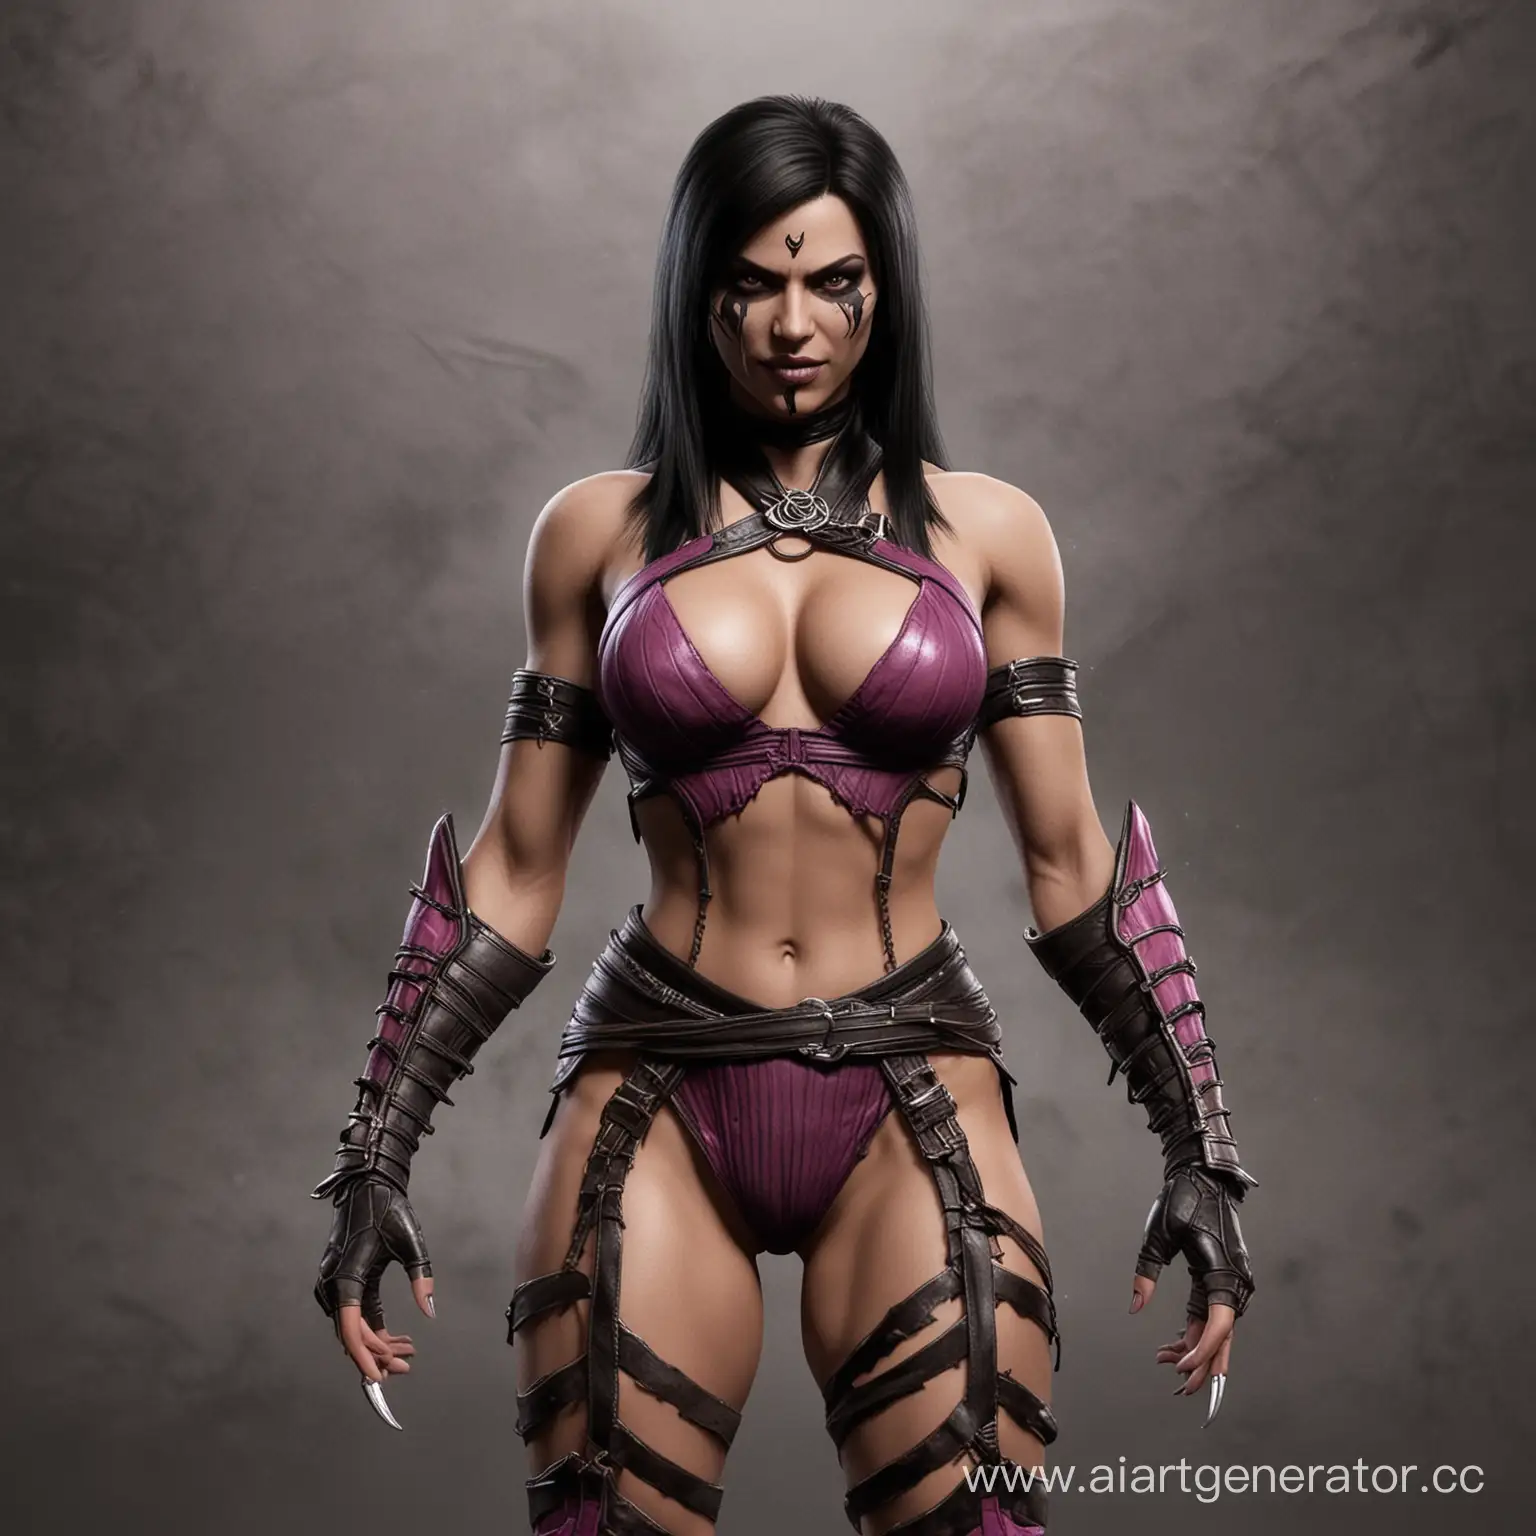 MKX-Mileena-Nude-Sultry-Warrior-Princess-from-Mortal-Kombat-X